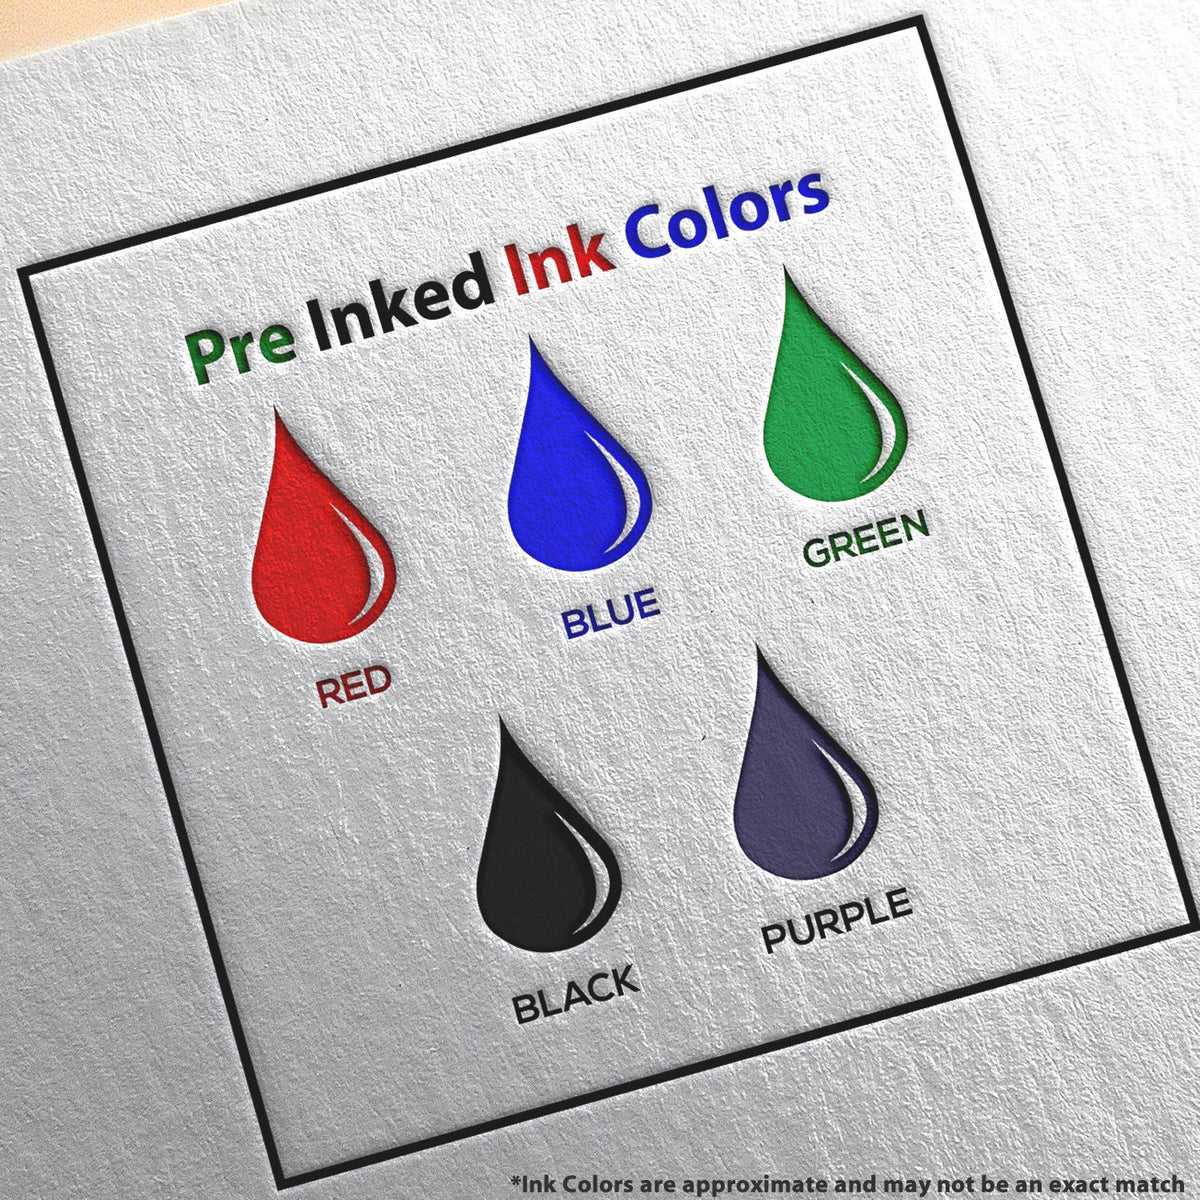 A picture showing the different ink colors or hues available for the Slim Pre-Inked Maryland Professional Engineer Seal Stamp product.